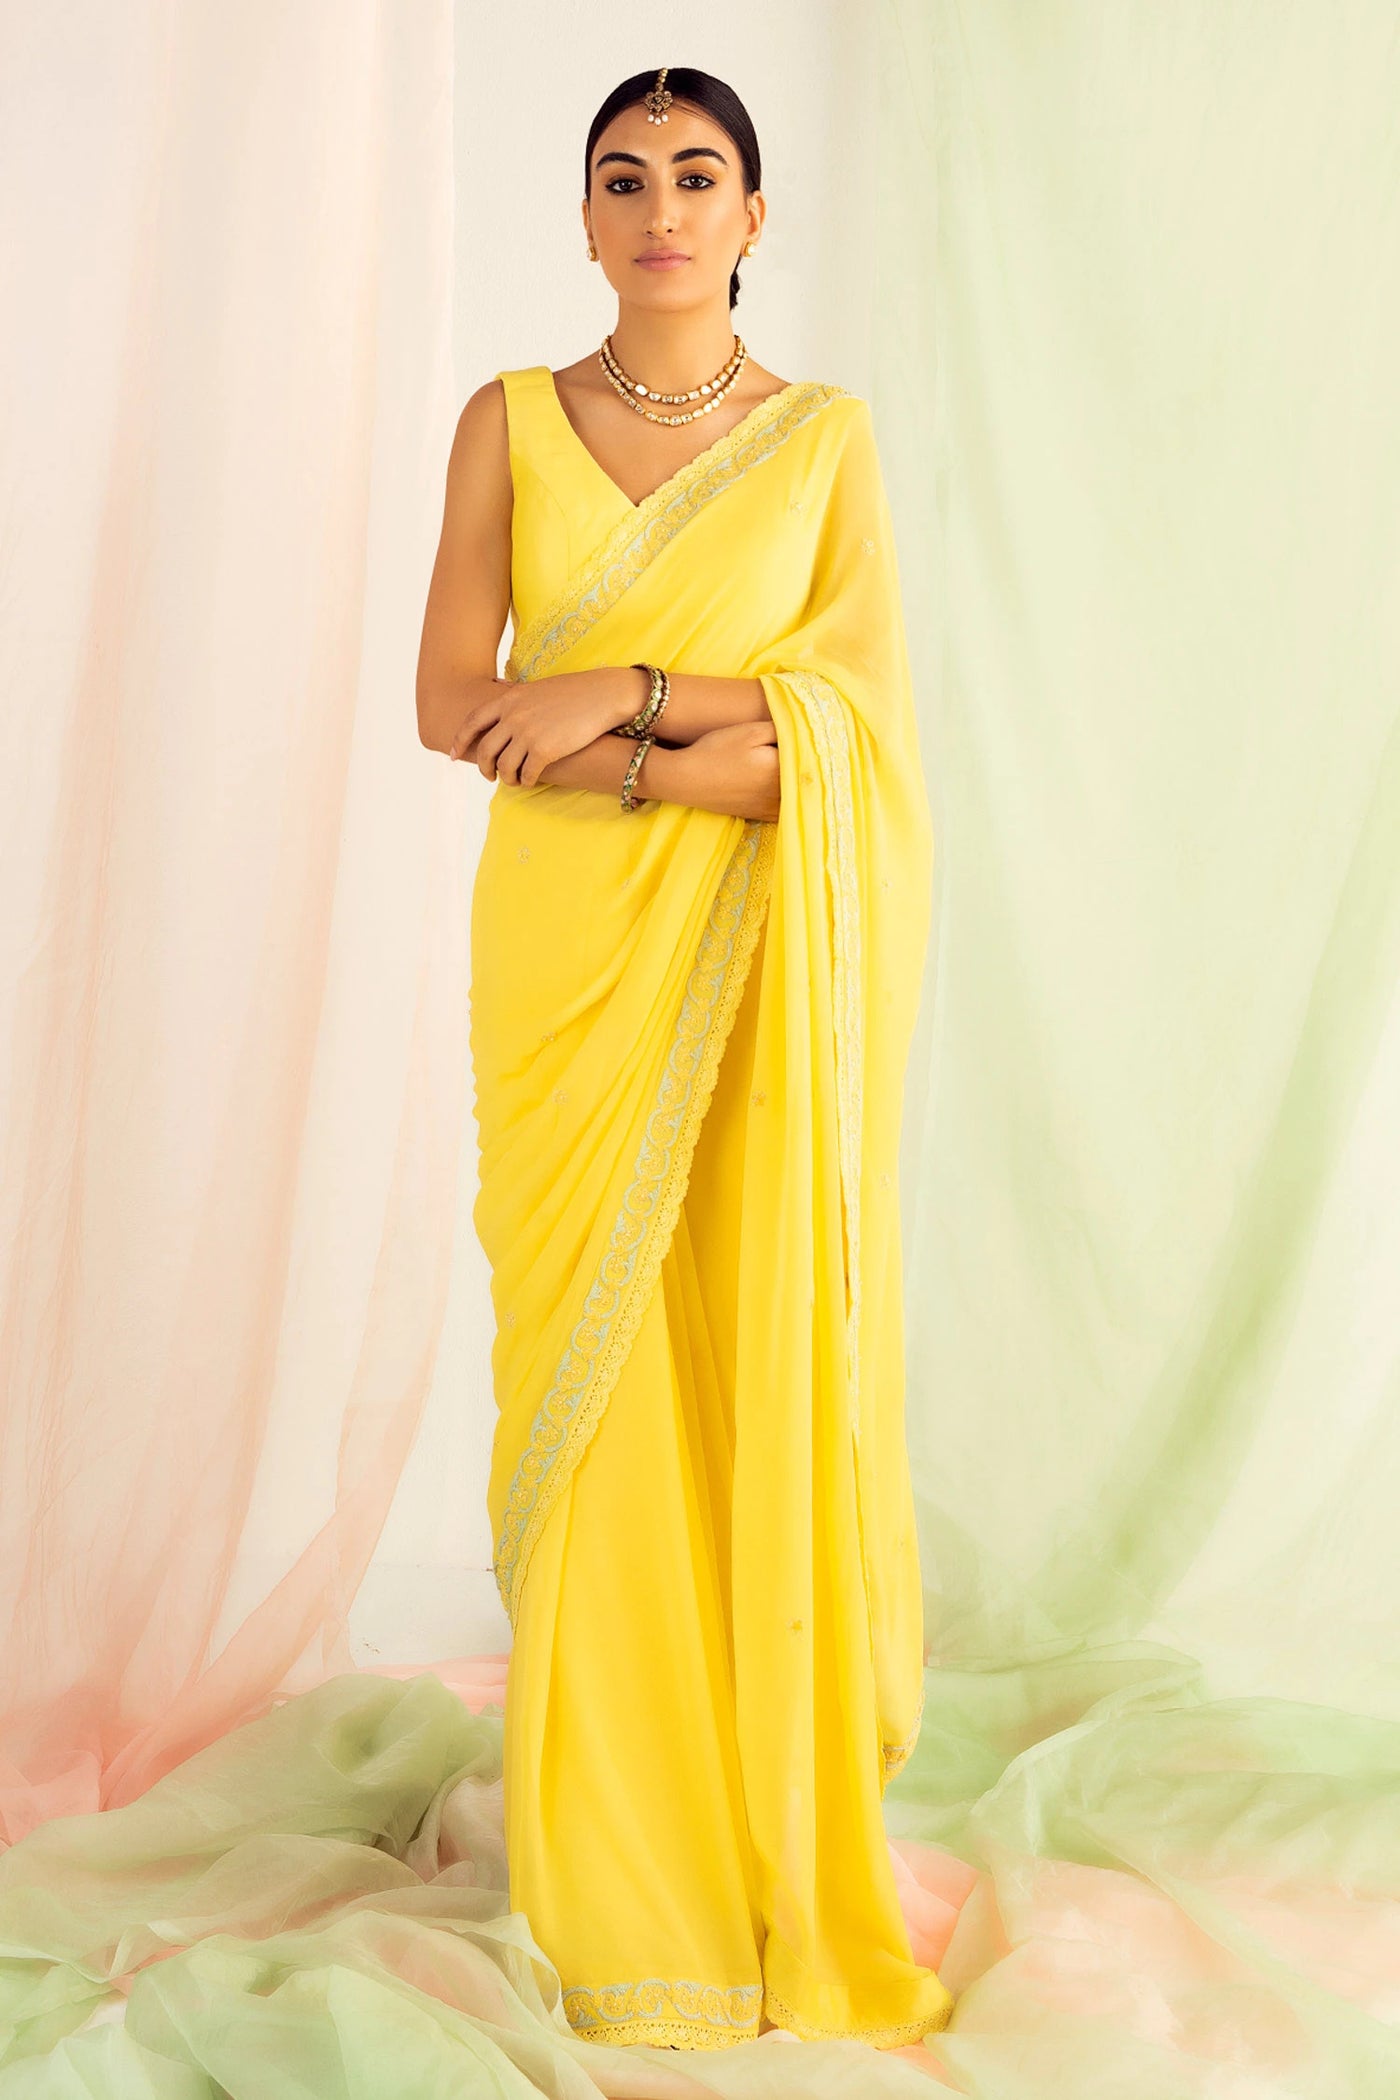 Yellow Lace Belted Saree - Indian Clothing in Denver, CO, Aurora, CO, Boulder, CO, Fort Collins, CO, Colorado Springs, CO, Parker, CO, Highlands Ranch, CO, Cherry Creek, CO, Centennial, CO, and Longmont, CO. Nationwide shipping USA - India Fashion X